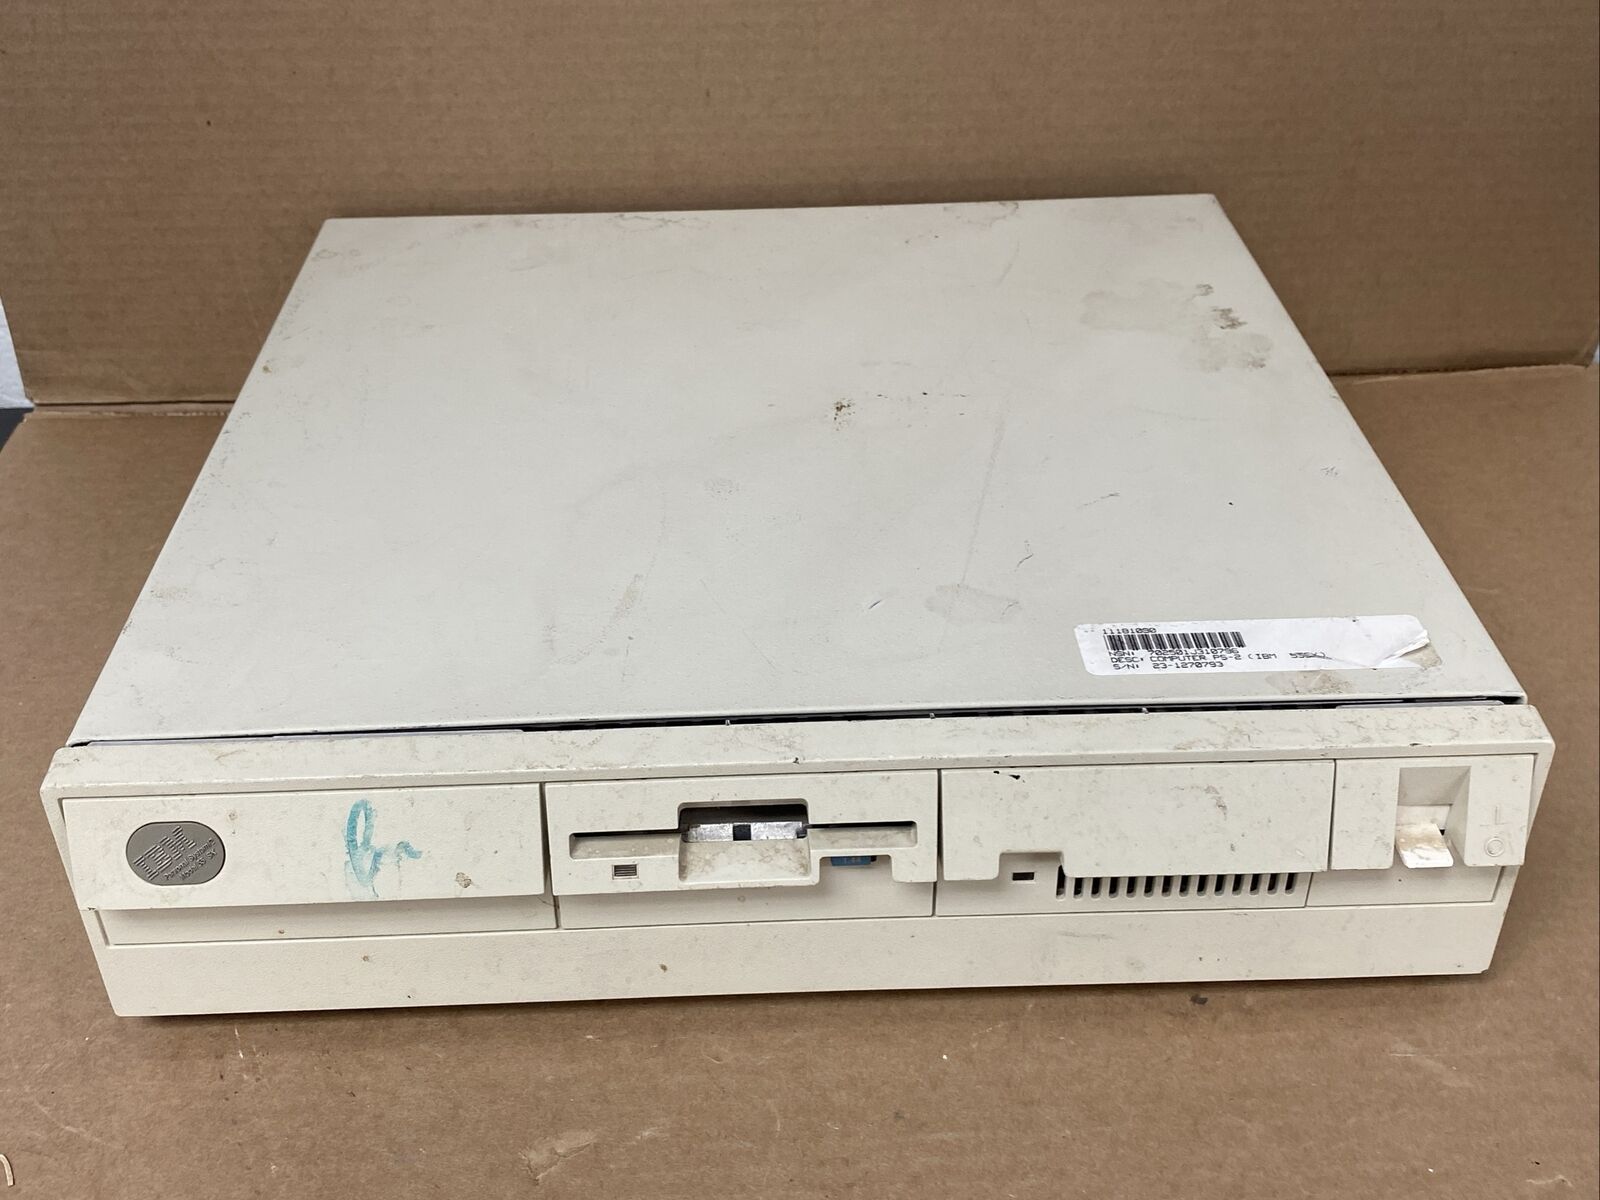 Vintage IBM PS/2 Model 55SX 60MB HDD Computer - Boots Up